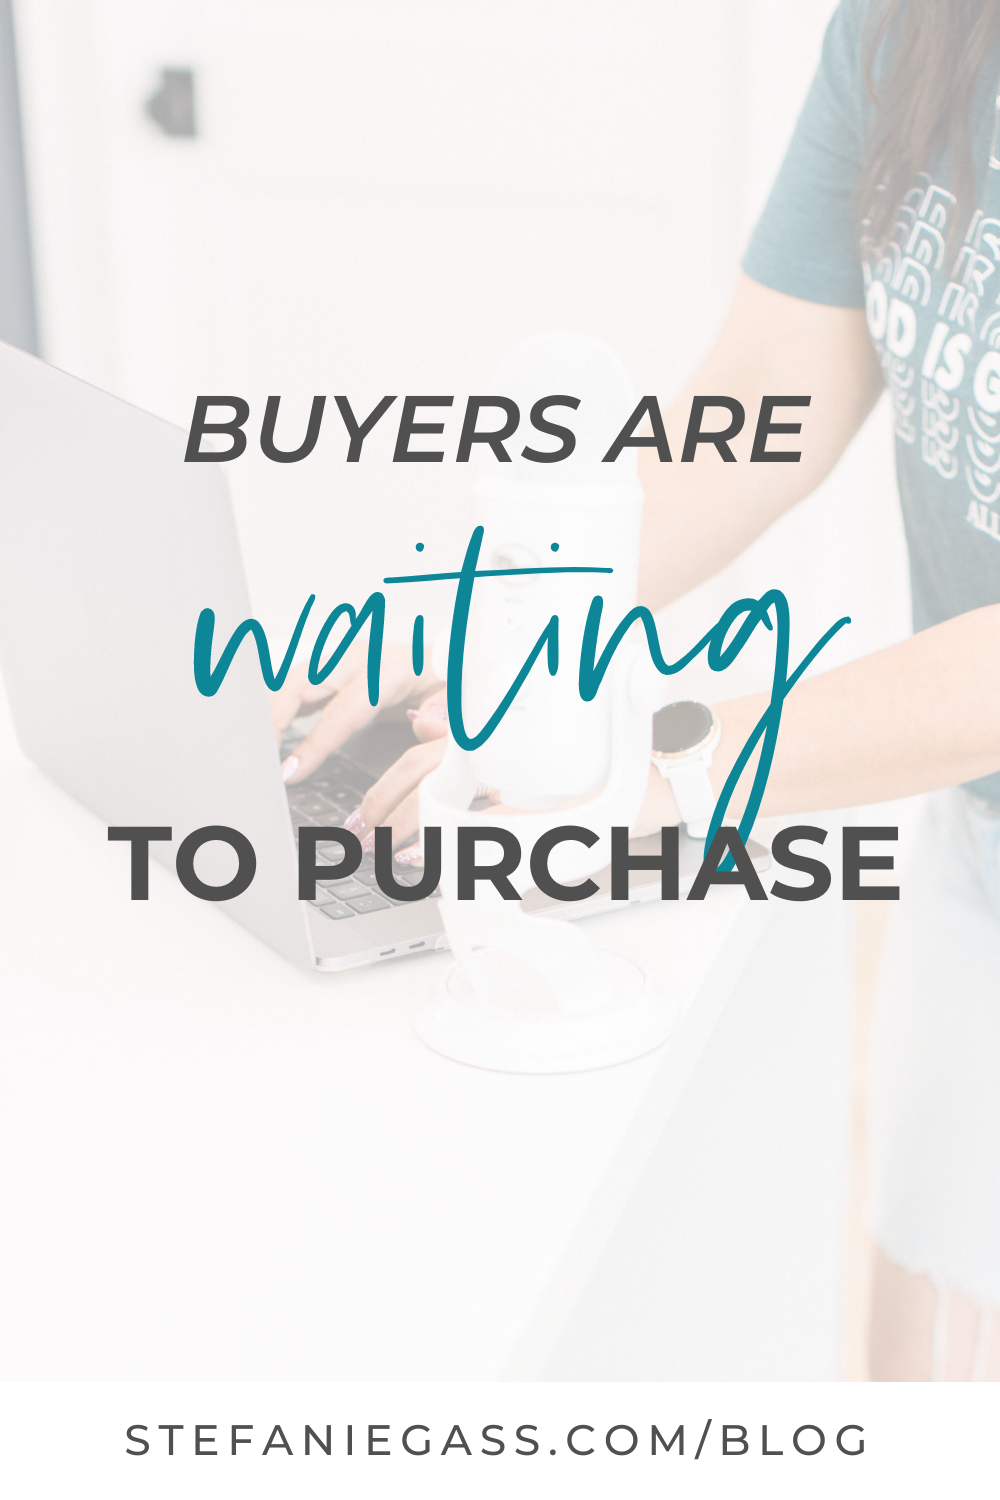 Background Image of a woman typing on the laptop Text reads:  Buyers are waiting to purchase.  Hold on as most sales will come at the last minute.  Stefaniegass.com Blog